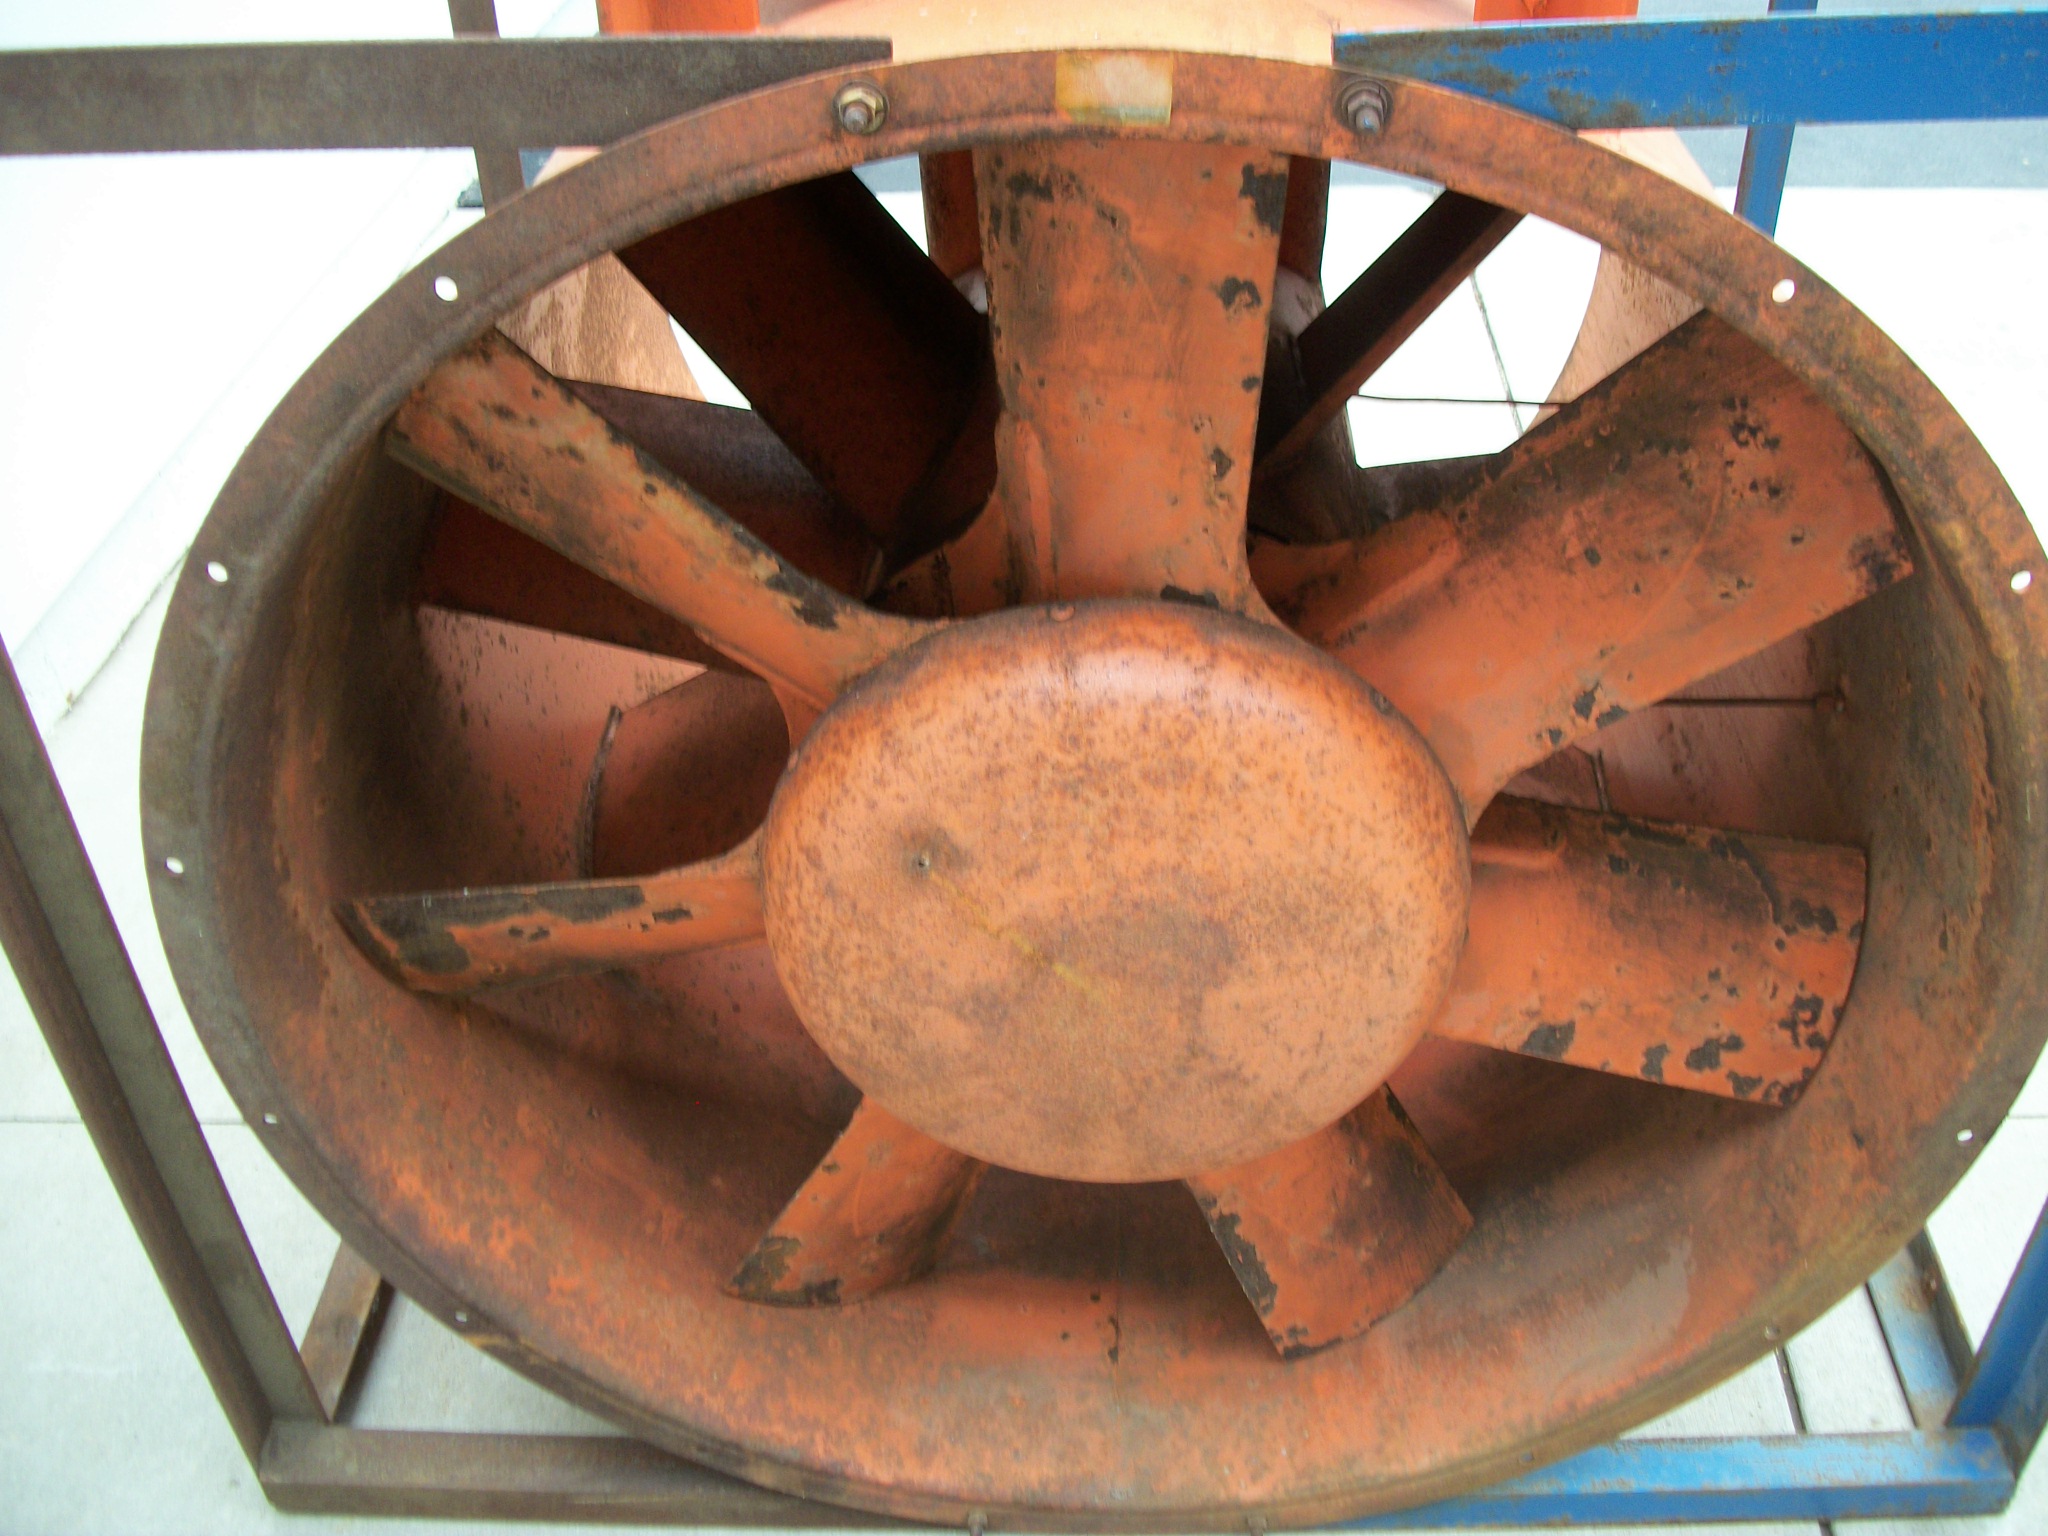 Used Exhaust Blower - Howden Buffalo 40 HP Tube Axial Blower EB2281-Blowers - Exhaust